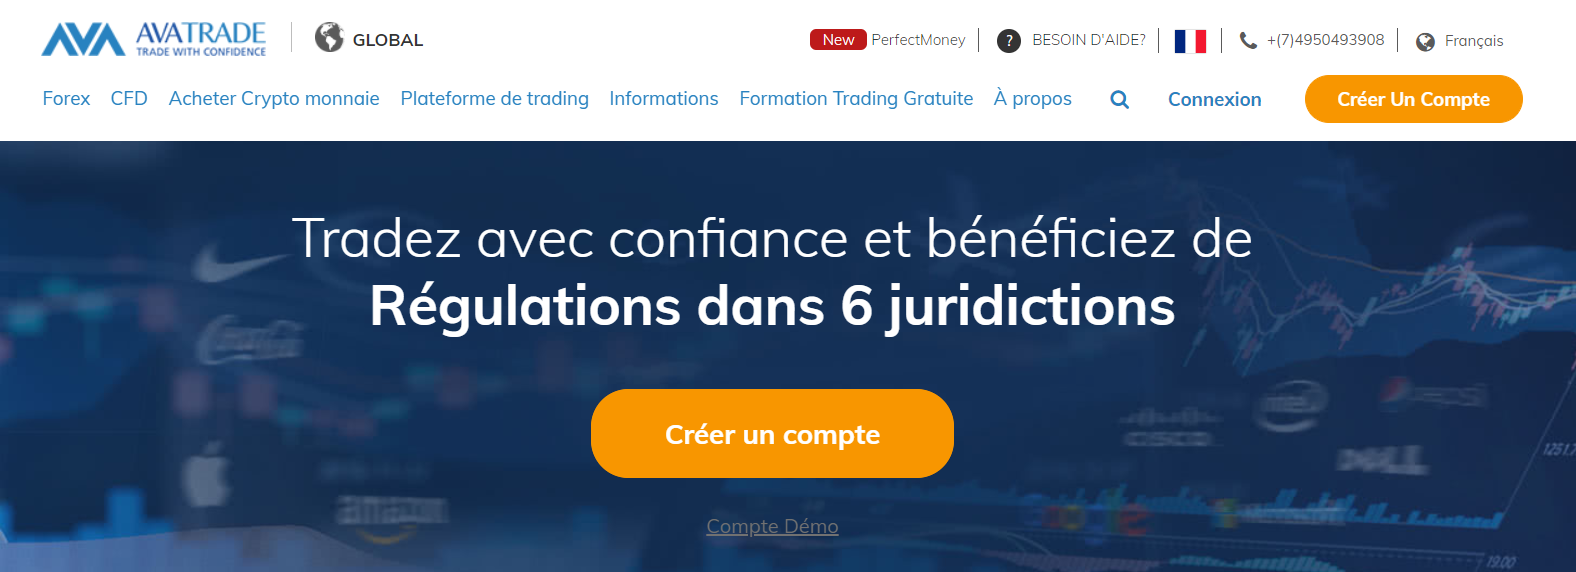 Analyse d’AvaTrade — compte personnel